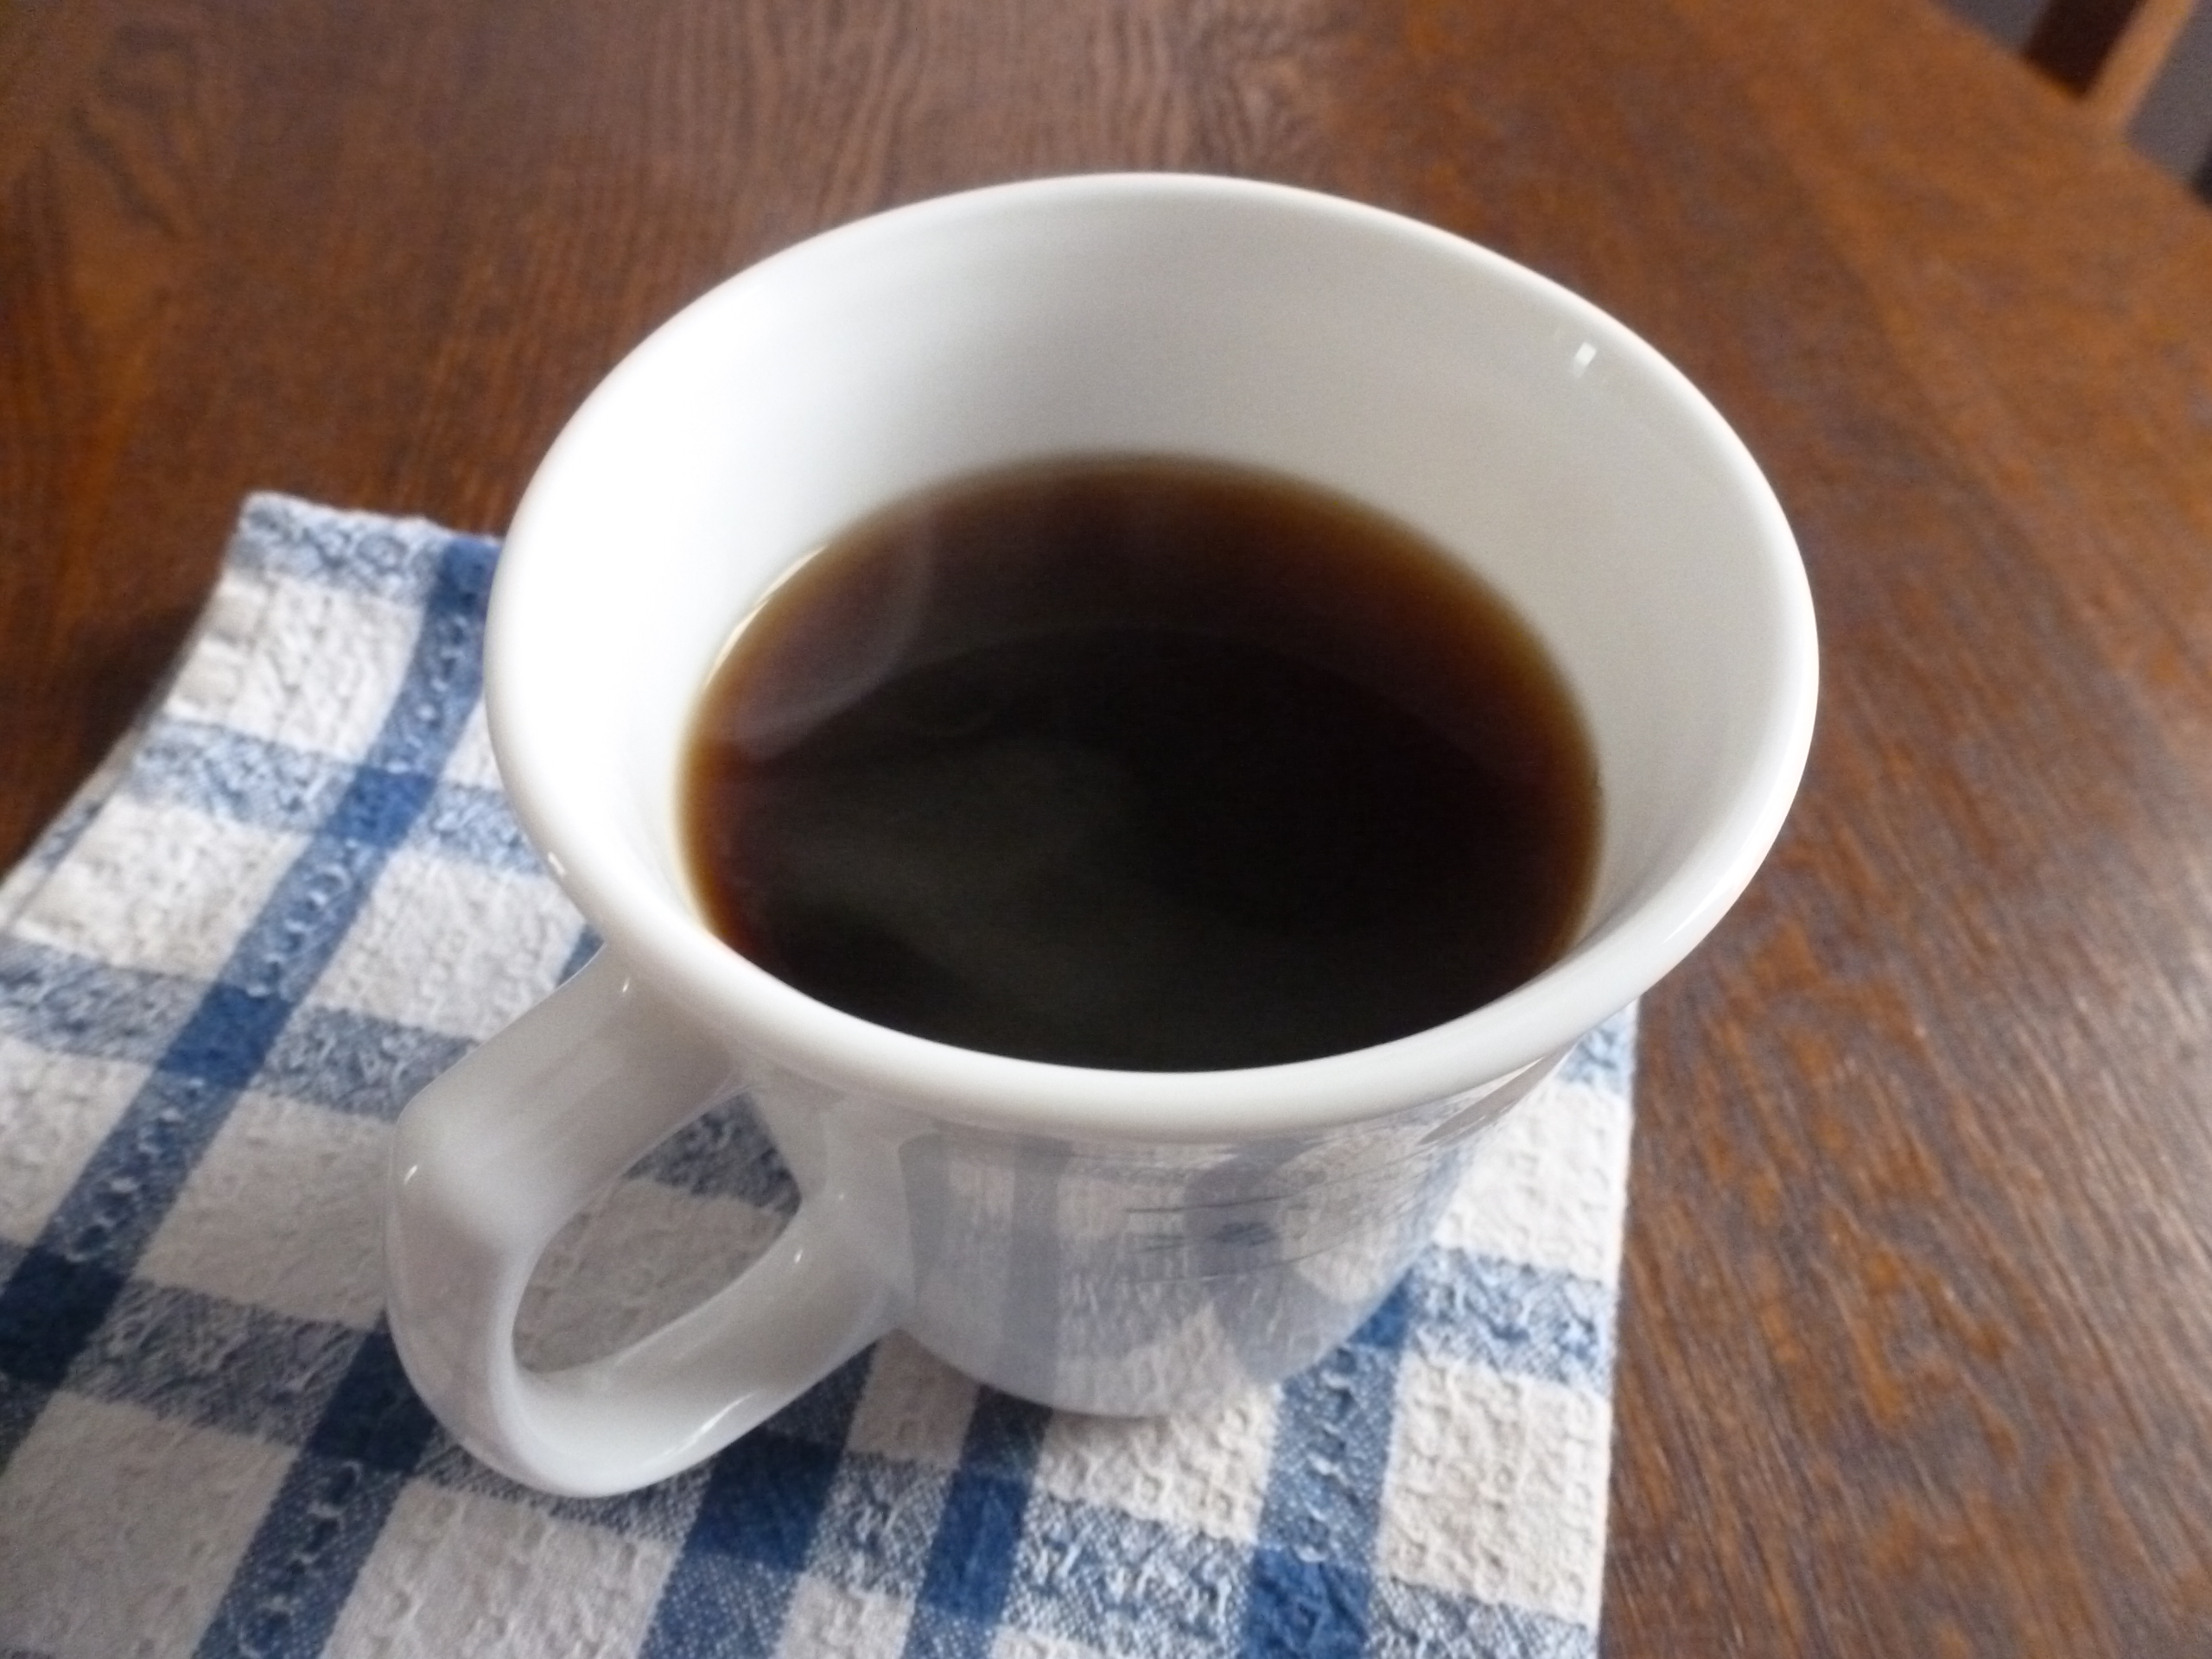 A cup of home-roasted coffee